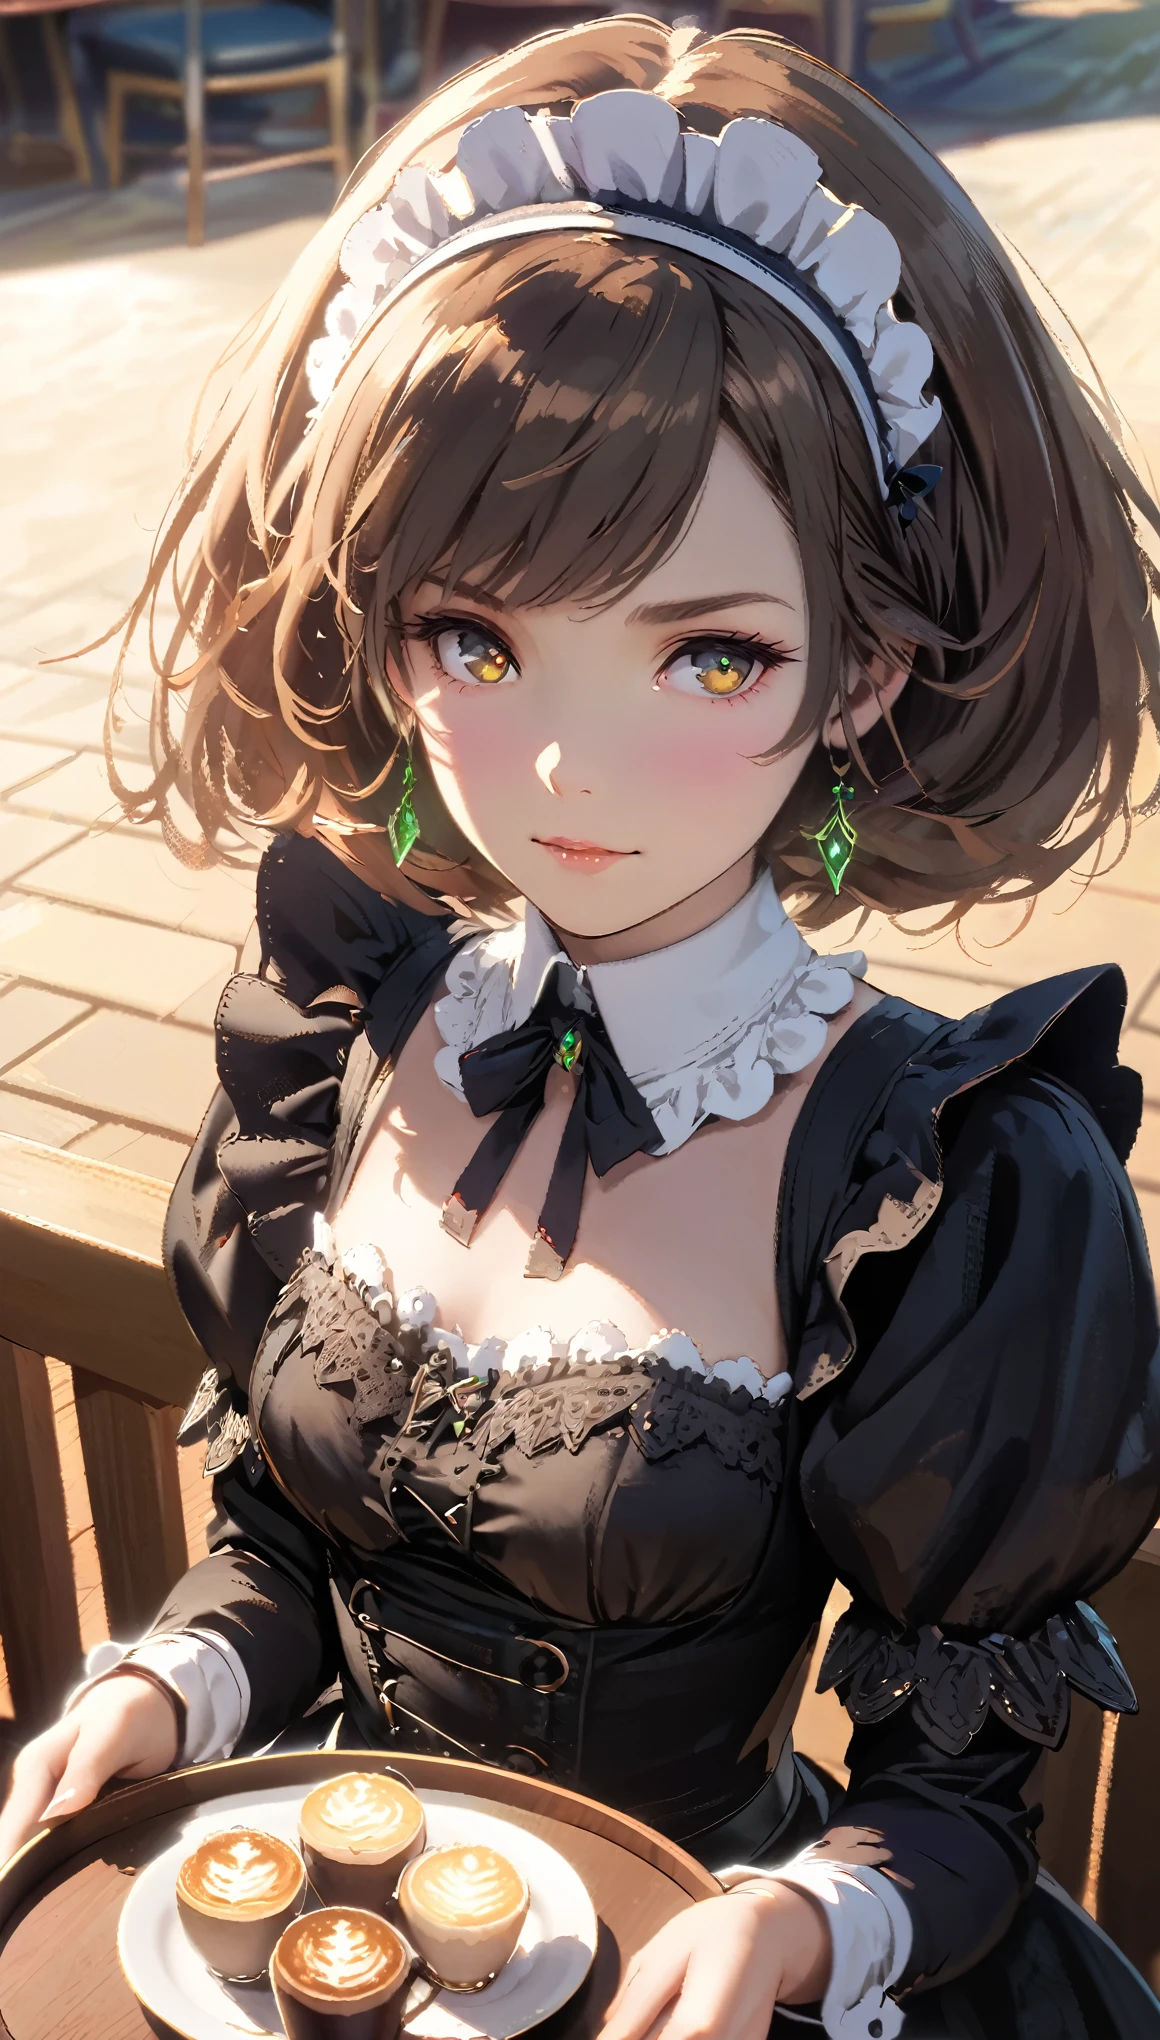 (masterpiece, High resolution,Super detailed:1.0),1 girl,Young and beautiful woman,Eyes staring at the camera,Perfect female body, Blushing lightly and smiling,Highly detailed CG,unity 8k wallpaper，Intricate details, The only person, (Twin-tailed brown hair,Maid clothes,Serious expression,Tray in hand),have coffee on the tray,Cafe, Terrace seats,Gothic style,Portraiture,Color Difference, Depth of written boundary,Dramatic Shadows, Ray Tracing, highest quality, Cinema Lighting,Official Art,
